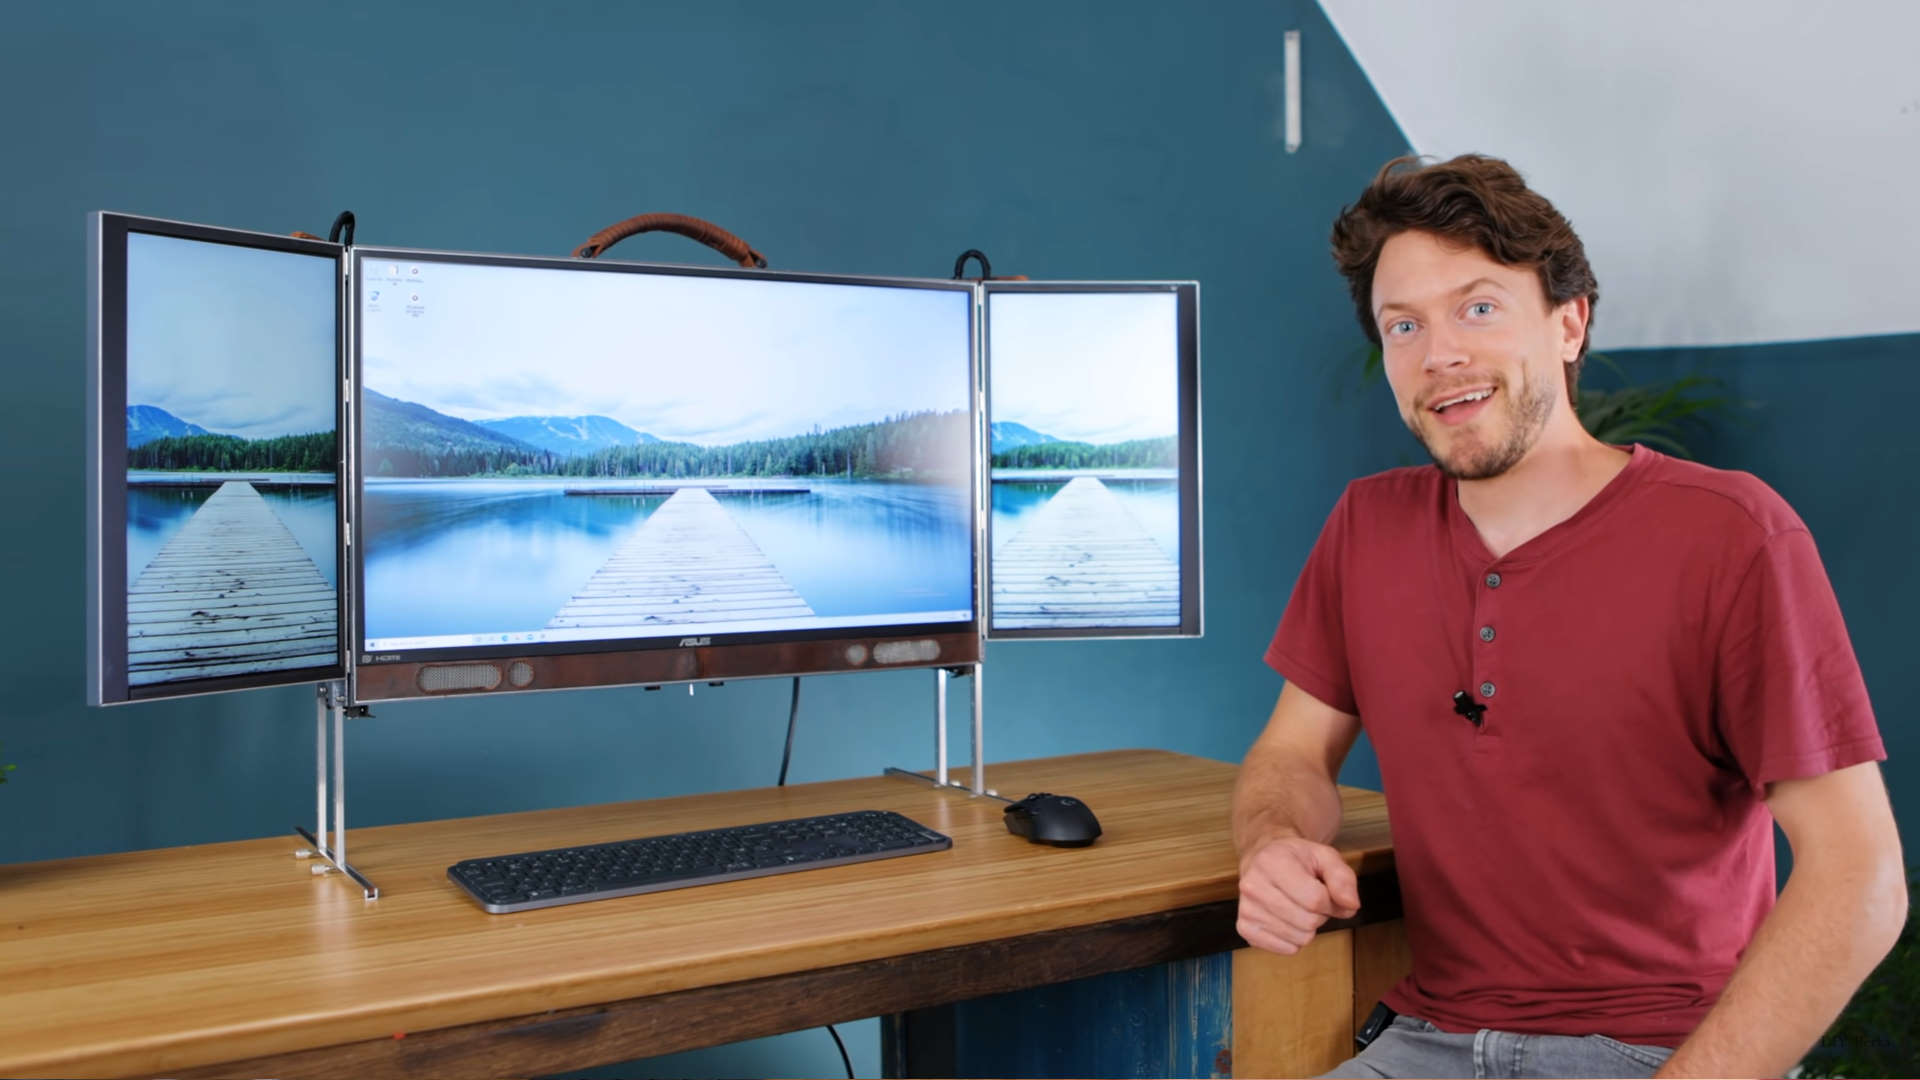 Matt with his custom, portable all in one PC from the DIY Perks Youtube channel